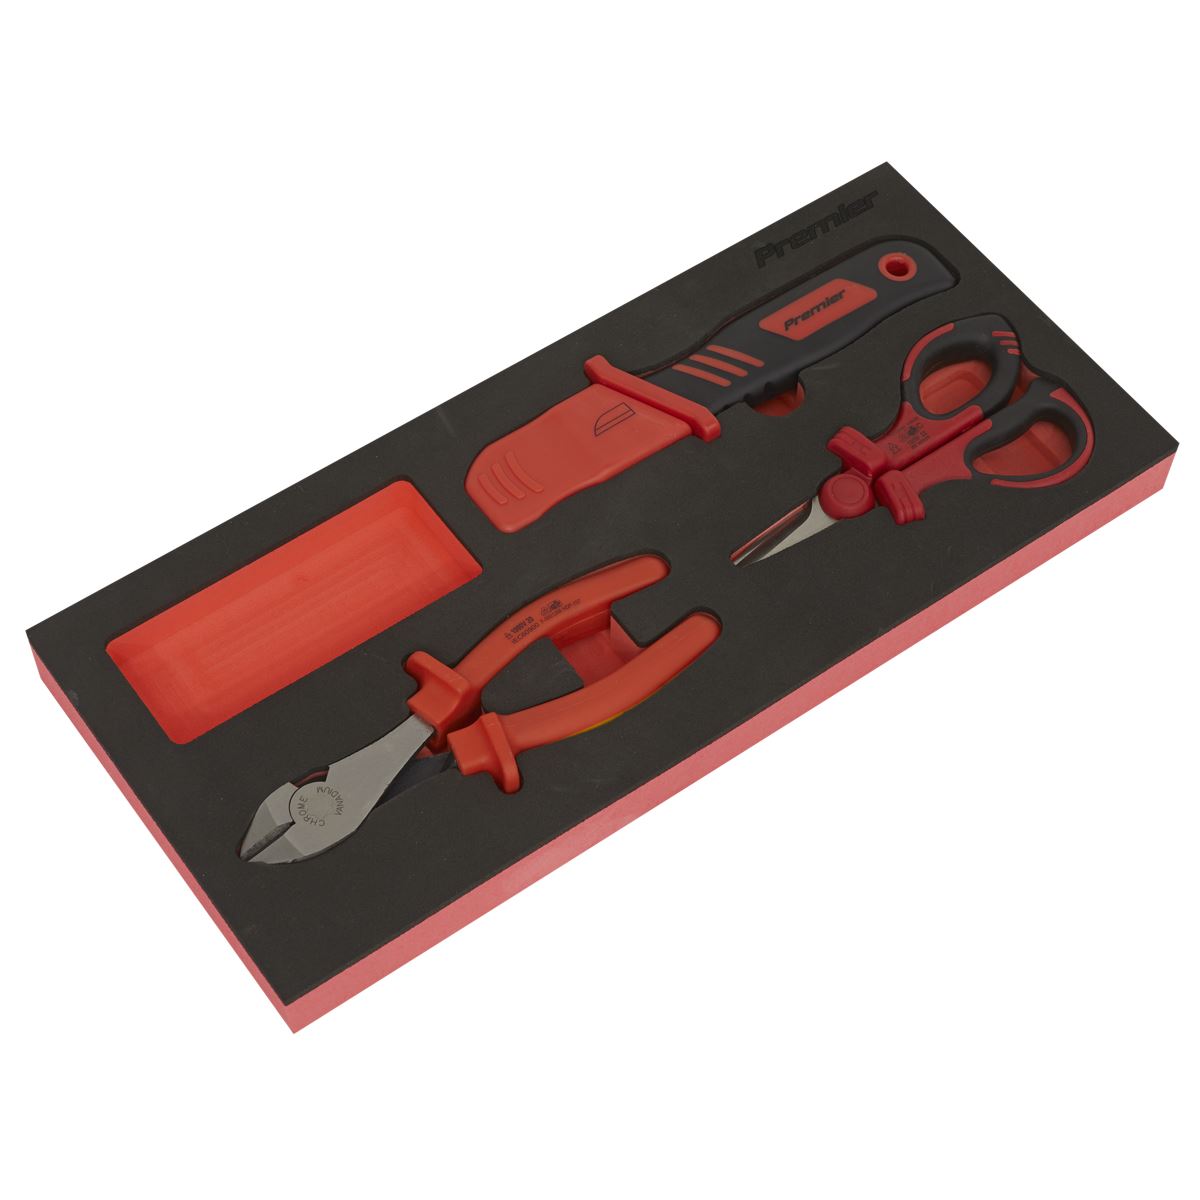 Sealey Premier Insulated Cutting Set 3pc with Tool Tray - VDE Approved